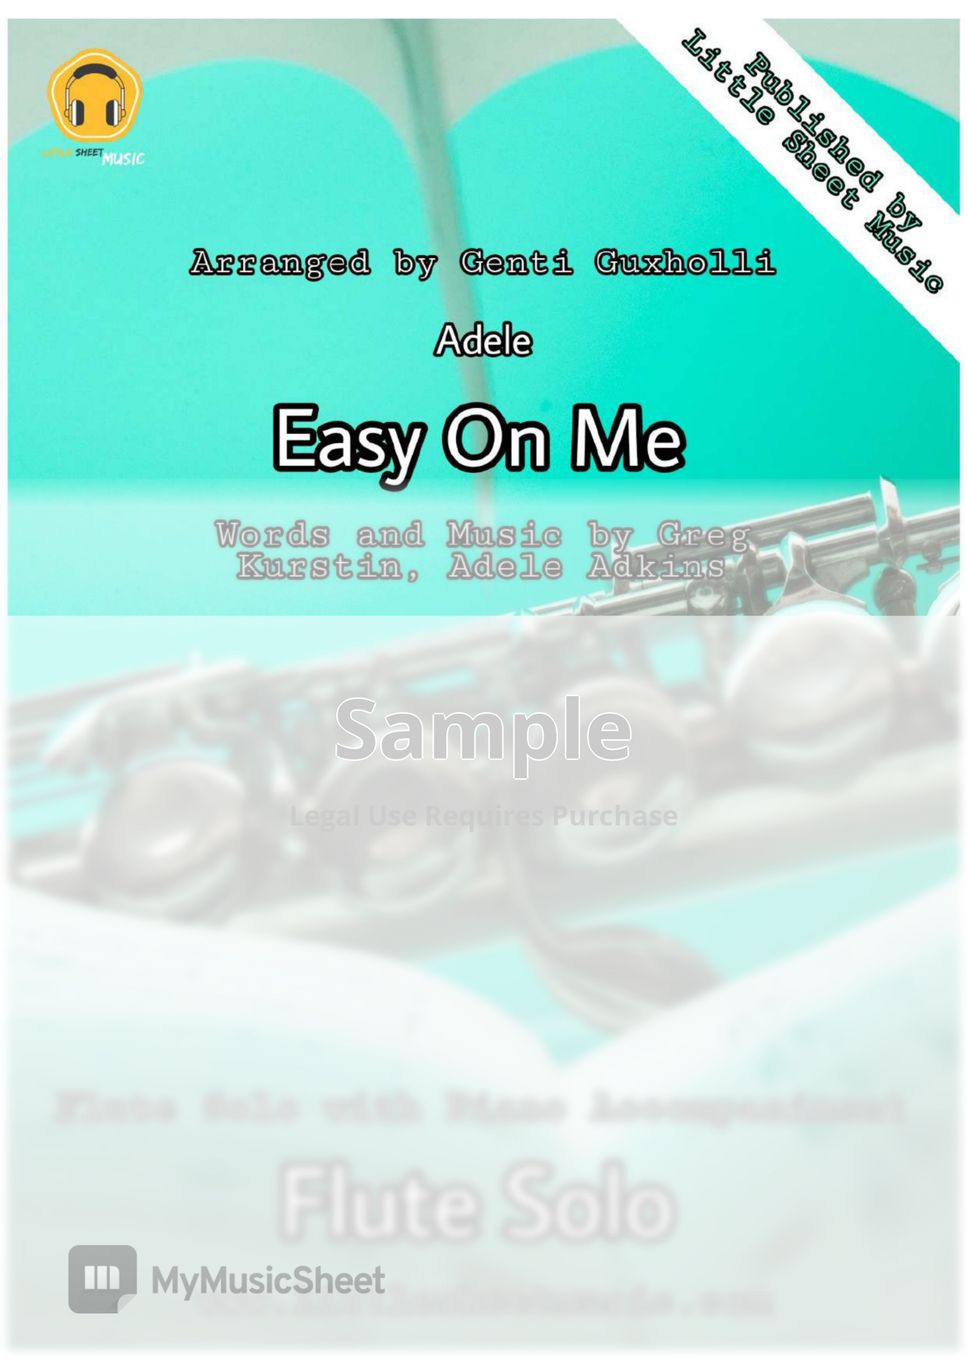 Adele - Easy On Me (Flute Solo with Piano Accompaniment) by Genti Guxholli